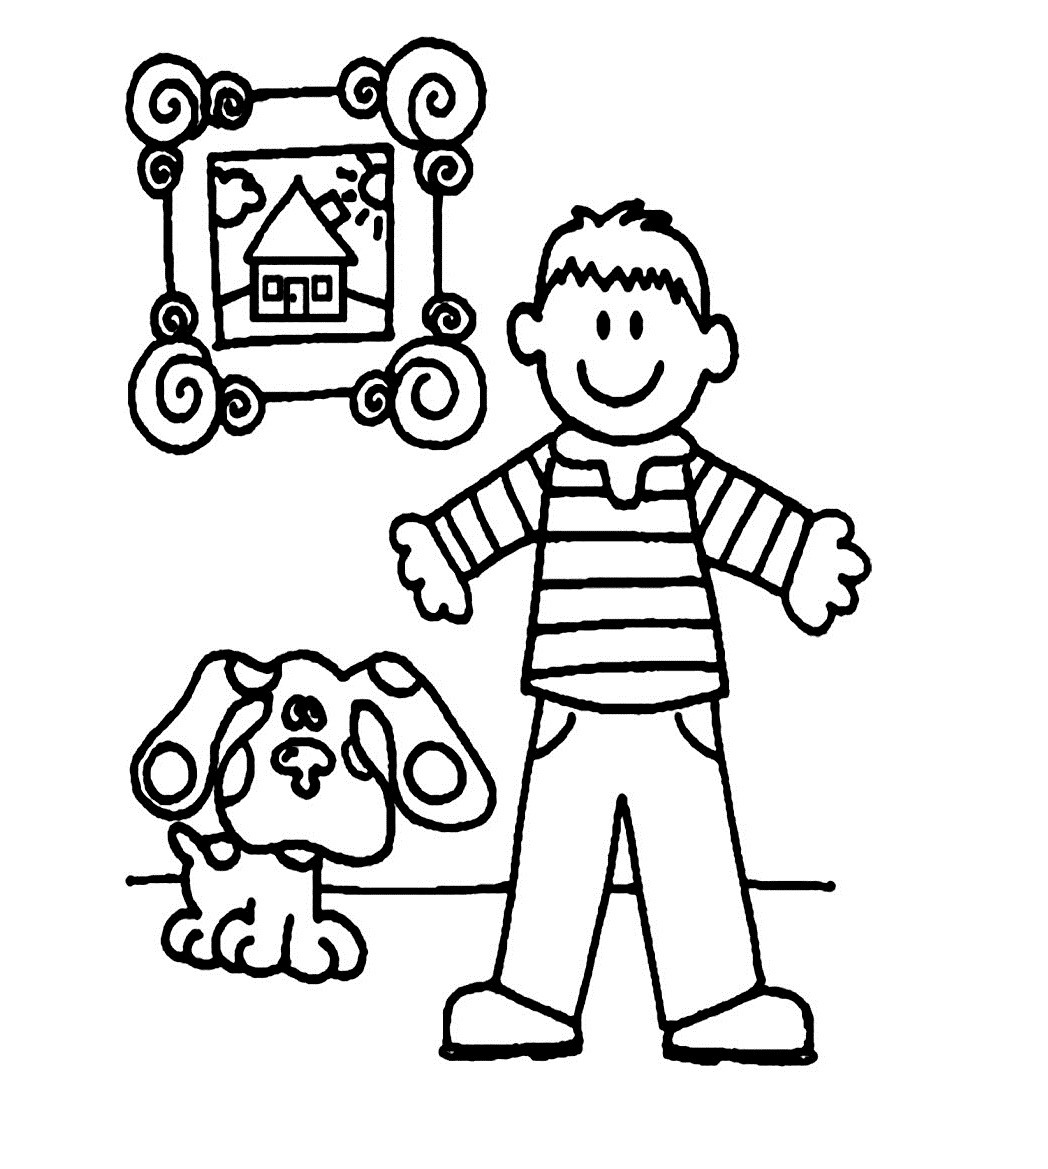 Kids Coloring Sheets For Boys
 Free Printable Boy Coloring Pages For Kids